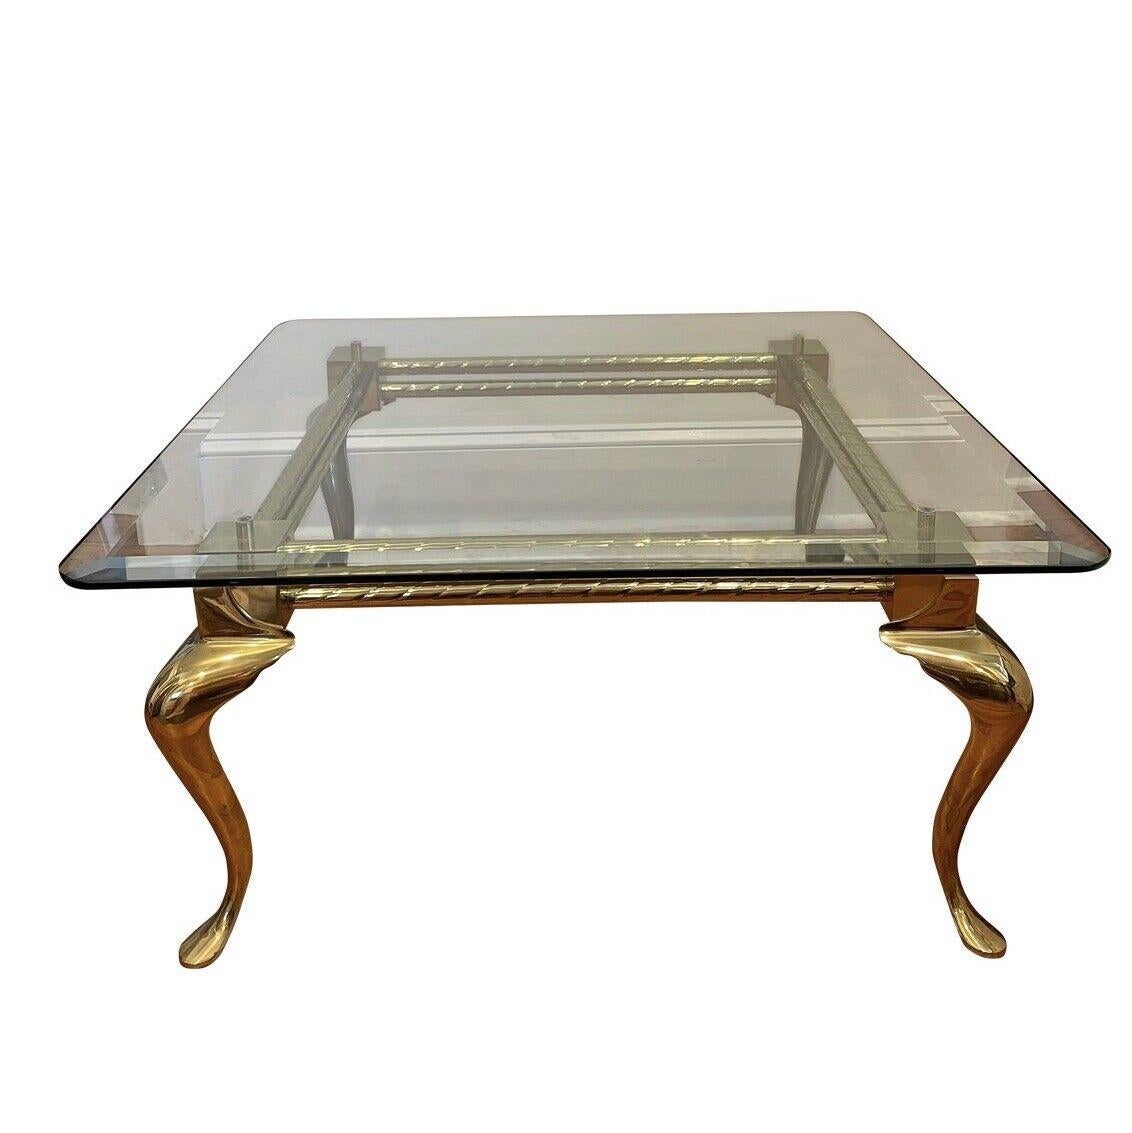 Elegant modern brass coffee table with cabriole legs and Industrial design frame with twist stretchers. Beveled 1/2